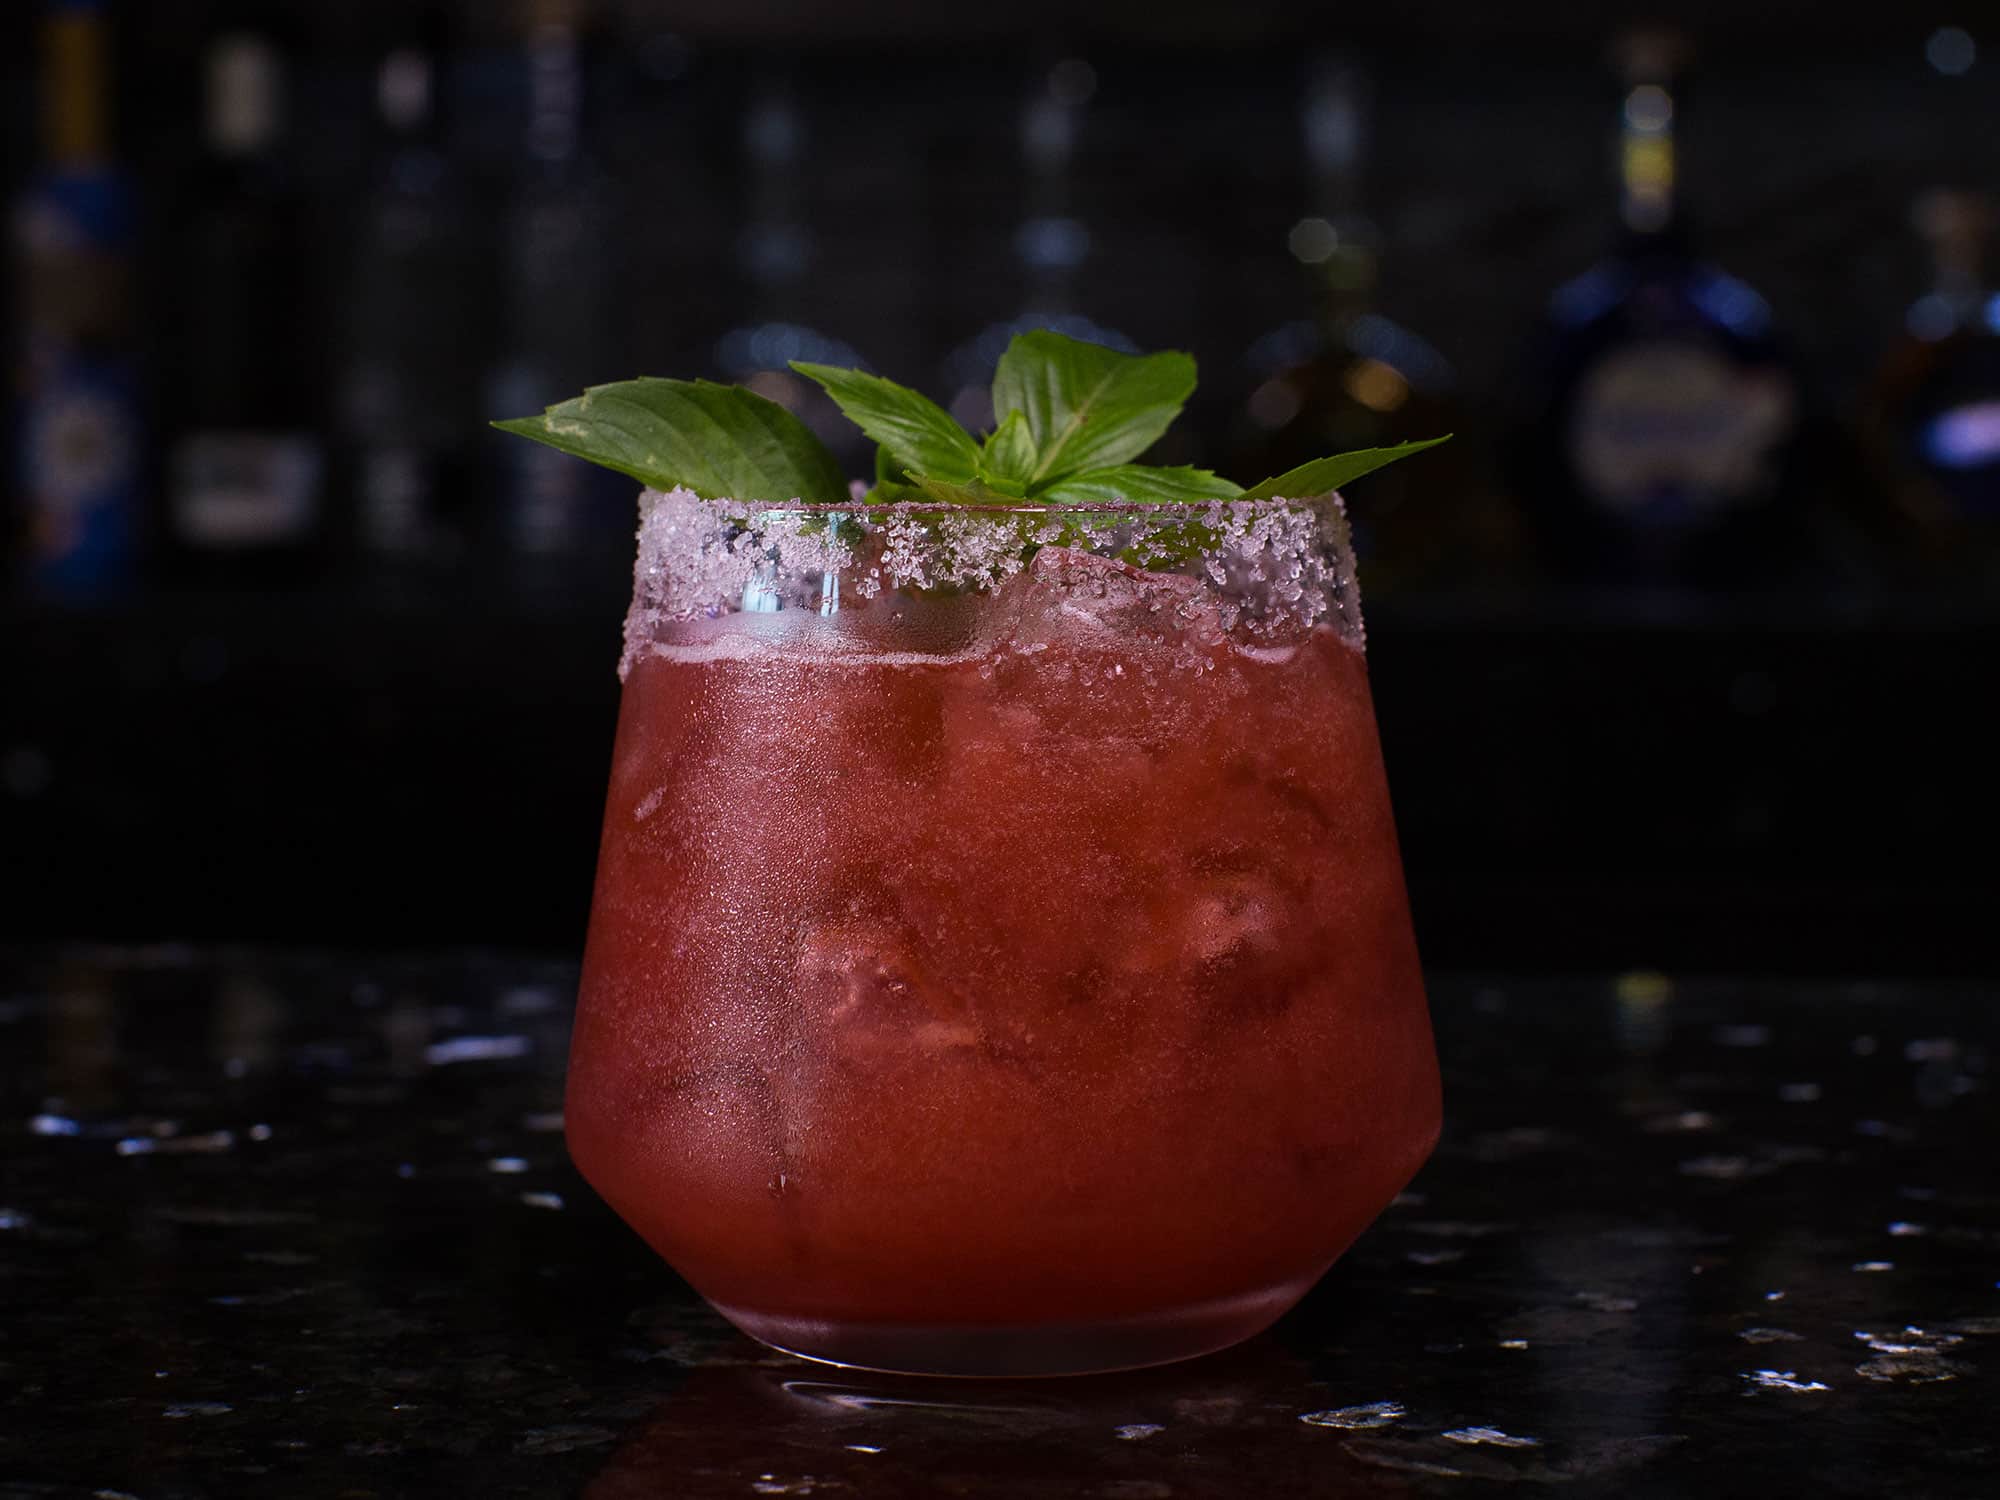 The Strawberry Basilita margarita from the lobby bar at the JW Marriott Cancun Resort and Spa.